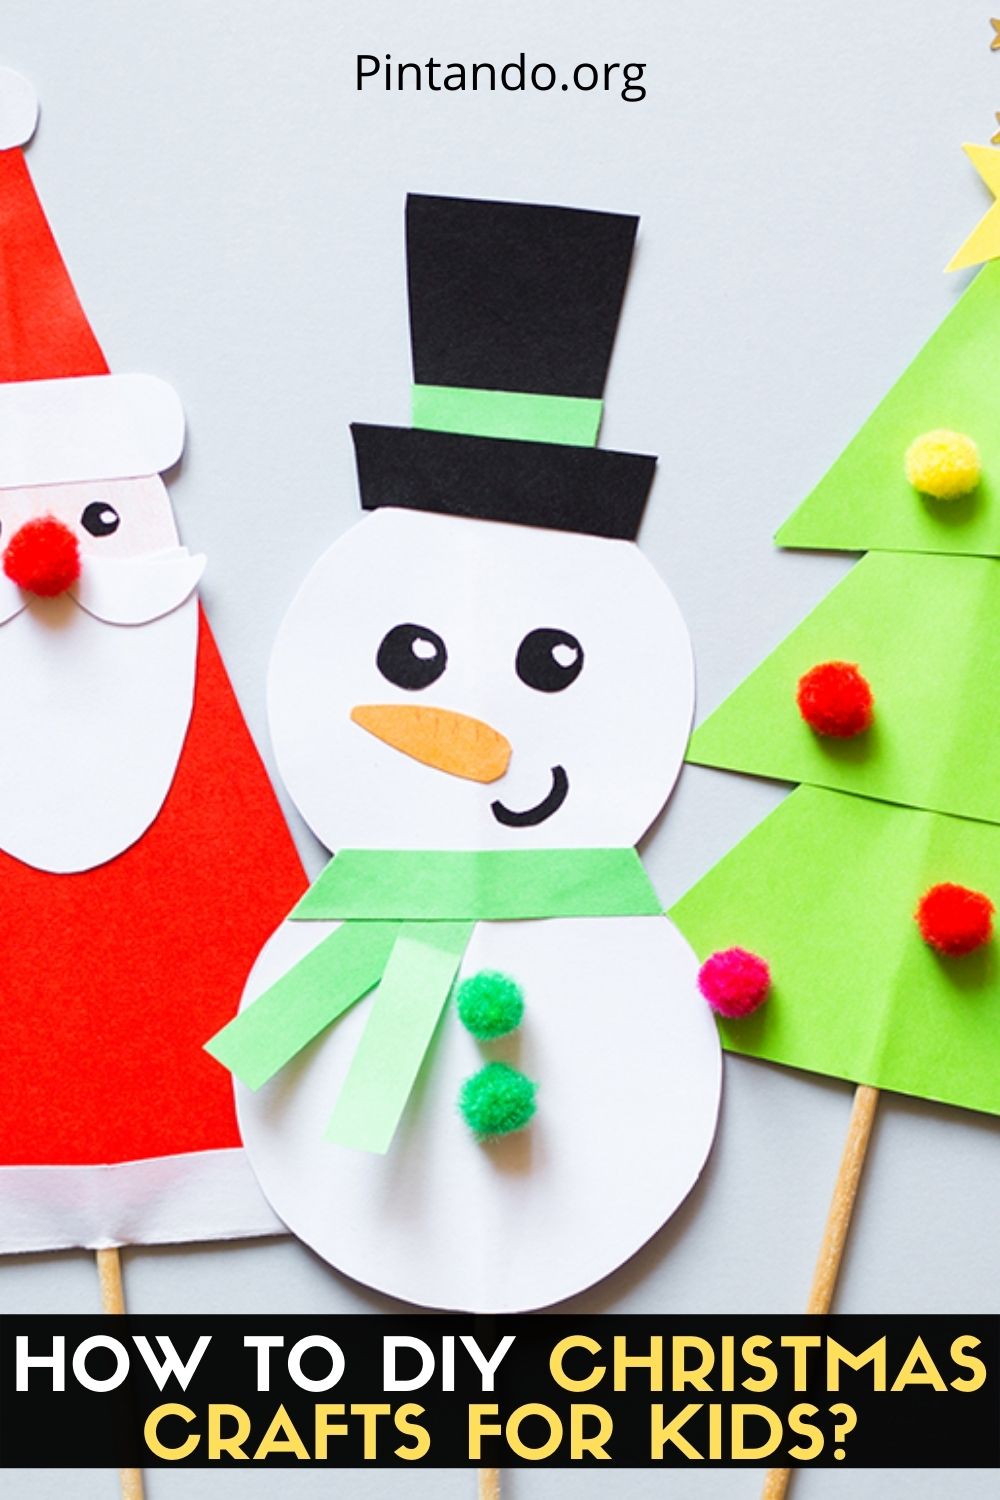 HOW TO DIY CHRISTMAS CRAFTS FOR KIDS